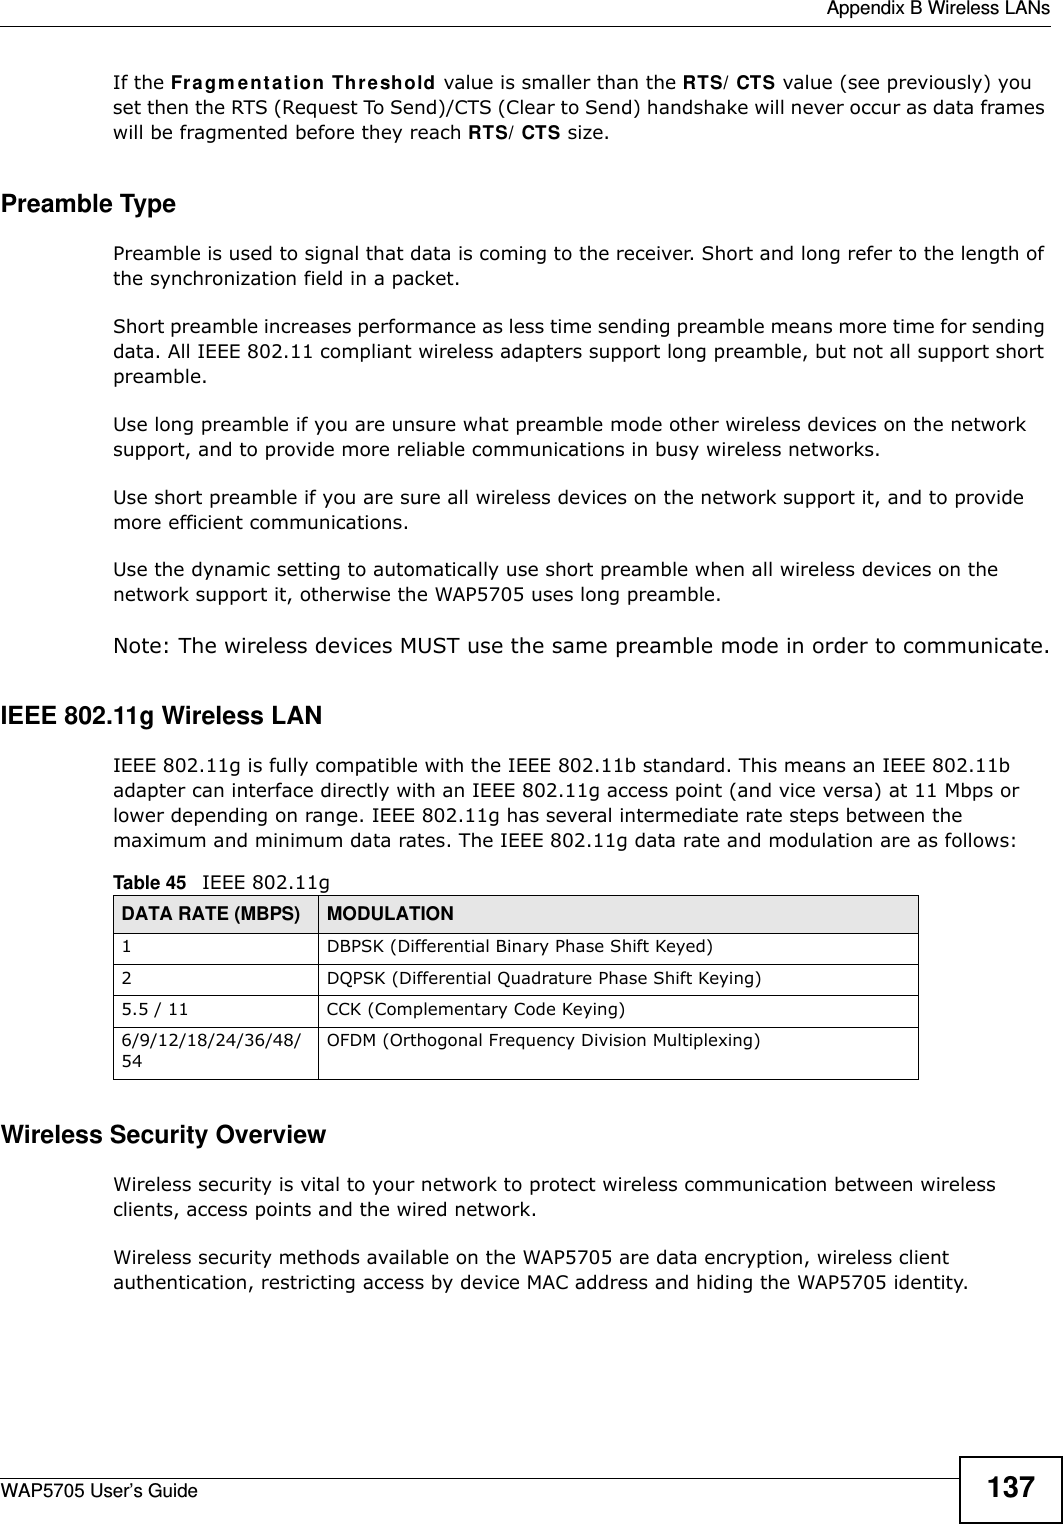  Appendix B Wireless LANsWAP5705 User’s Guide 137If the Fra gm en t a t ion  Thre shold value is smaller than the RTS/ CTS value (see previously) you set then the RTS (Request To Send)/CTS (Clear to Send) handshake will never occur as data frames will be fragmented before they reach RTS/ CTS size.Preamble TypePreamble is used to signal that data is coming to the receiver. Short and long refer to the length of the synchronization field in a packet.Short preamble increases performance as less time sending preamble means more time for sending data. All IEEE 802.11 compliant wireless adapters support long preamble, but not all support short preamble. Use long preamble if you are unsure what preamble mode other wireless devices on the network support, and to provide more reliable communications in busy wireless networks. Use short preamble if you are sure all wireless devices on the network support it, and to provide more efficient communications.Use the dynamic setting to automatically use short preamble when all wireless devices on the network support it, otherwise the WAP5705 uses long preamble.Note: The wireless devices MUST use the same preamble mode in order to communicate.IEEE 802.11g Wireless LANIEEE 802.11g is fully compatible with the IEEE 802.11b standard. This means an IEEE 802.11b adapter can interface directly with an IEEE 802.11g access point (and vice versa) at 11 Mbps or lower depending on range. IEEE 802.11g has several intermediate rate steps between the maximum and minimum data rates. The IEEE 802.11g data rate and modulation are as follows:Wireless Security OverviewWireless security is vital to your network to protect wireless communication between wireless clients, access points and the wired network.Wireless security methods available on the WAP5705 are data encryption, wireless client authentication, restricting access by device MAC address and hiding the WAP5705 identity.Table 45   IEEE 802.11gDATA RATE (MBPS) MODULATION1 DBPSK (Differential Binary Phase Shift Keyed)2 DQPSK (Differential Quadrature Phase Shift Keying)5.5 / 11 CCK (Complementary Code Keying) 6/9/12/18/24/36/48/54OFDM (Orthogonal Frequency Division Multiplexing) 